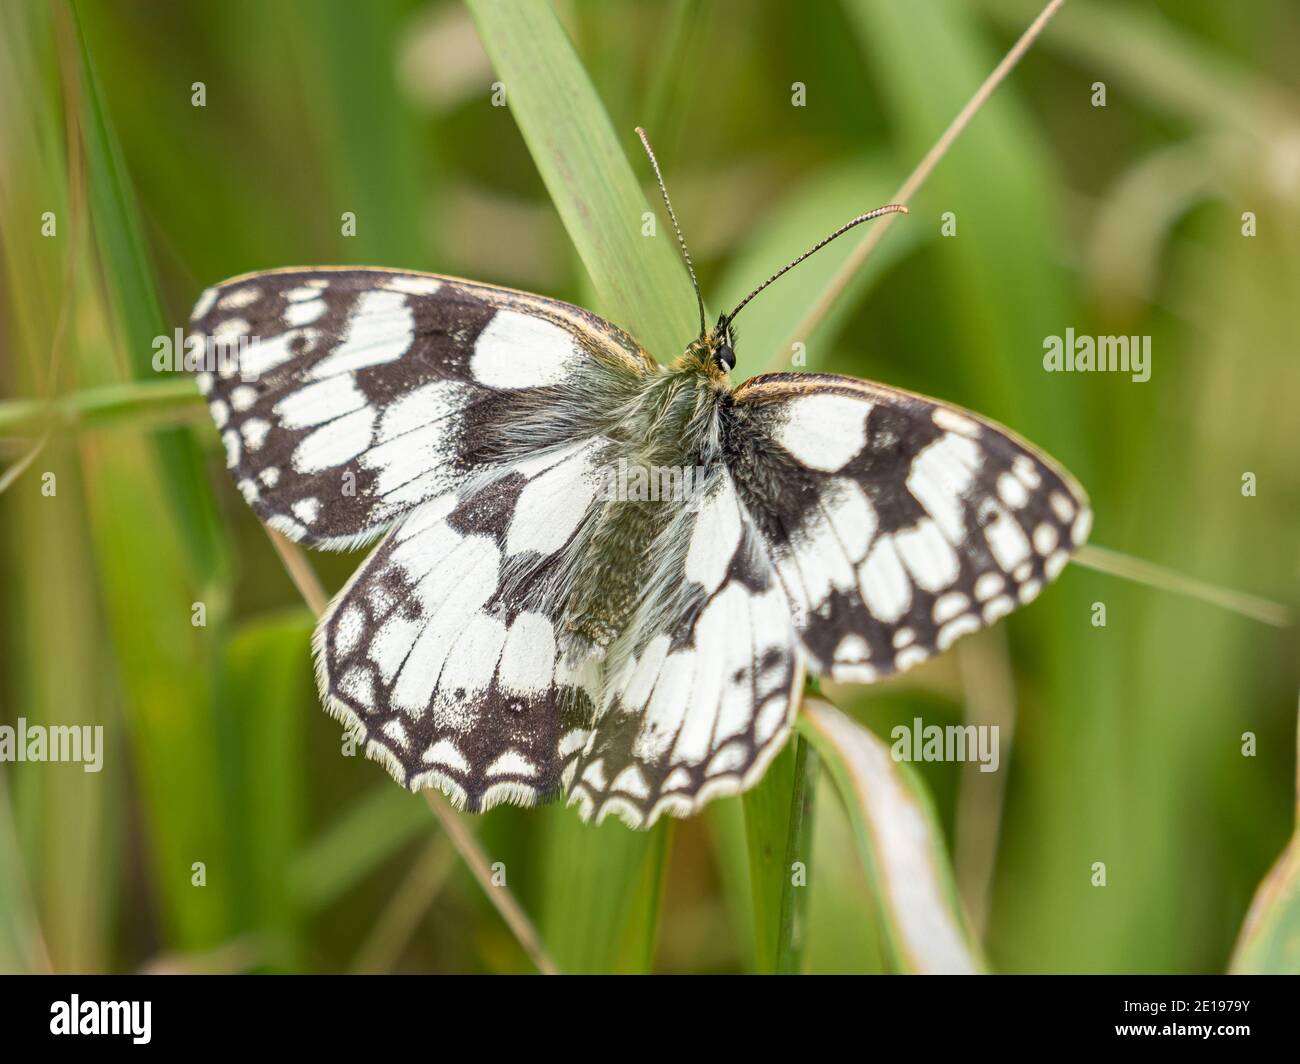 A marbled white butterfly (Melanargia galathea) in the Beddington Farmlands nature reserve in Sutton, London. Stock Photo